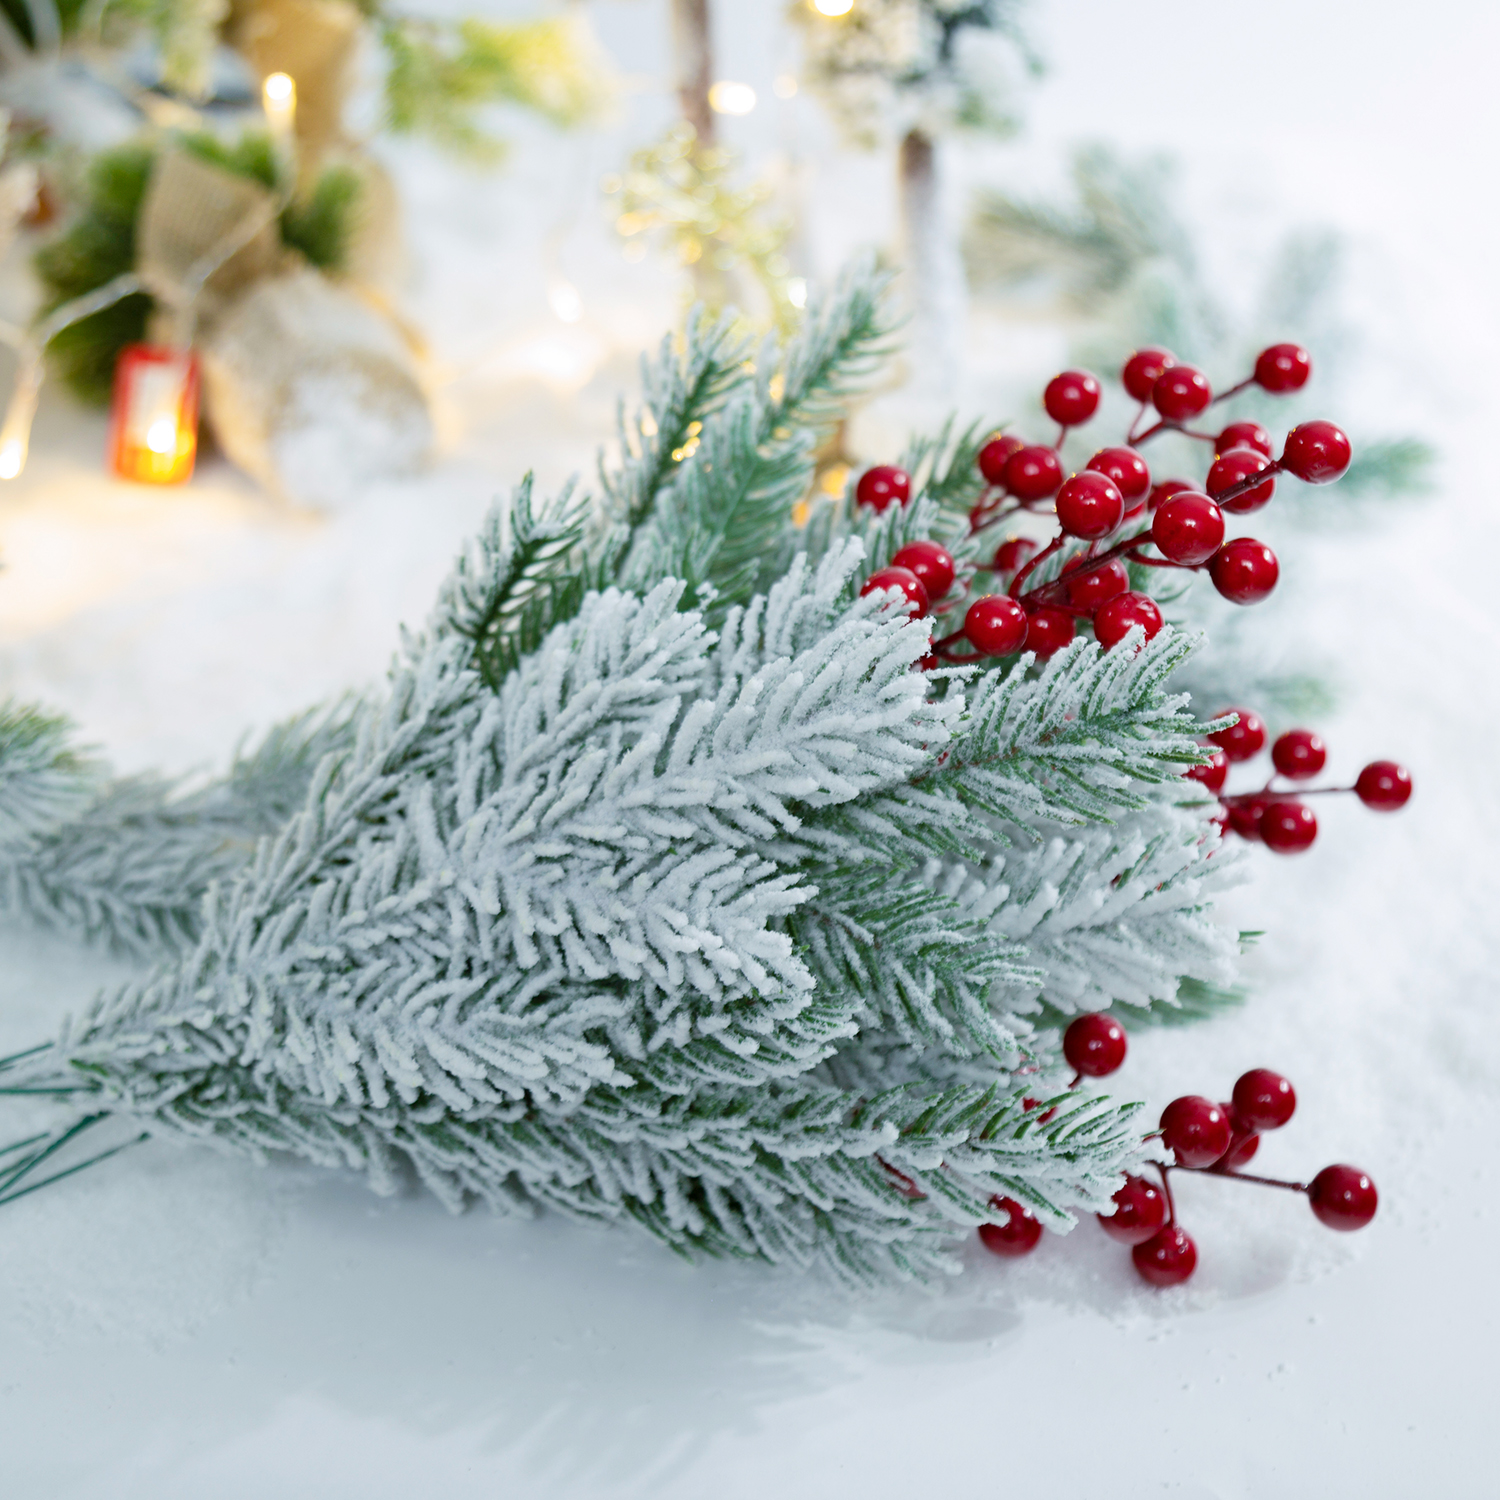 Christmas background of natural and artificial pine branches with